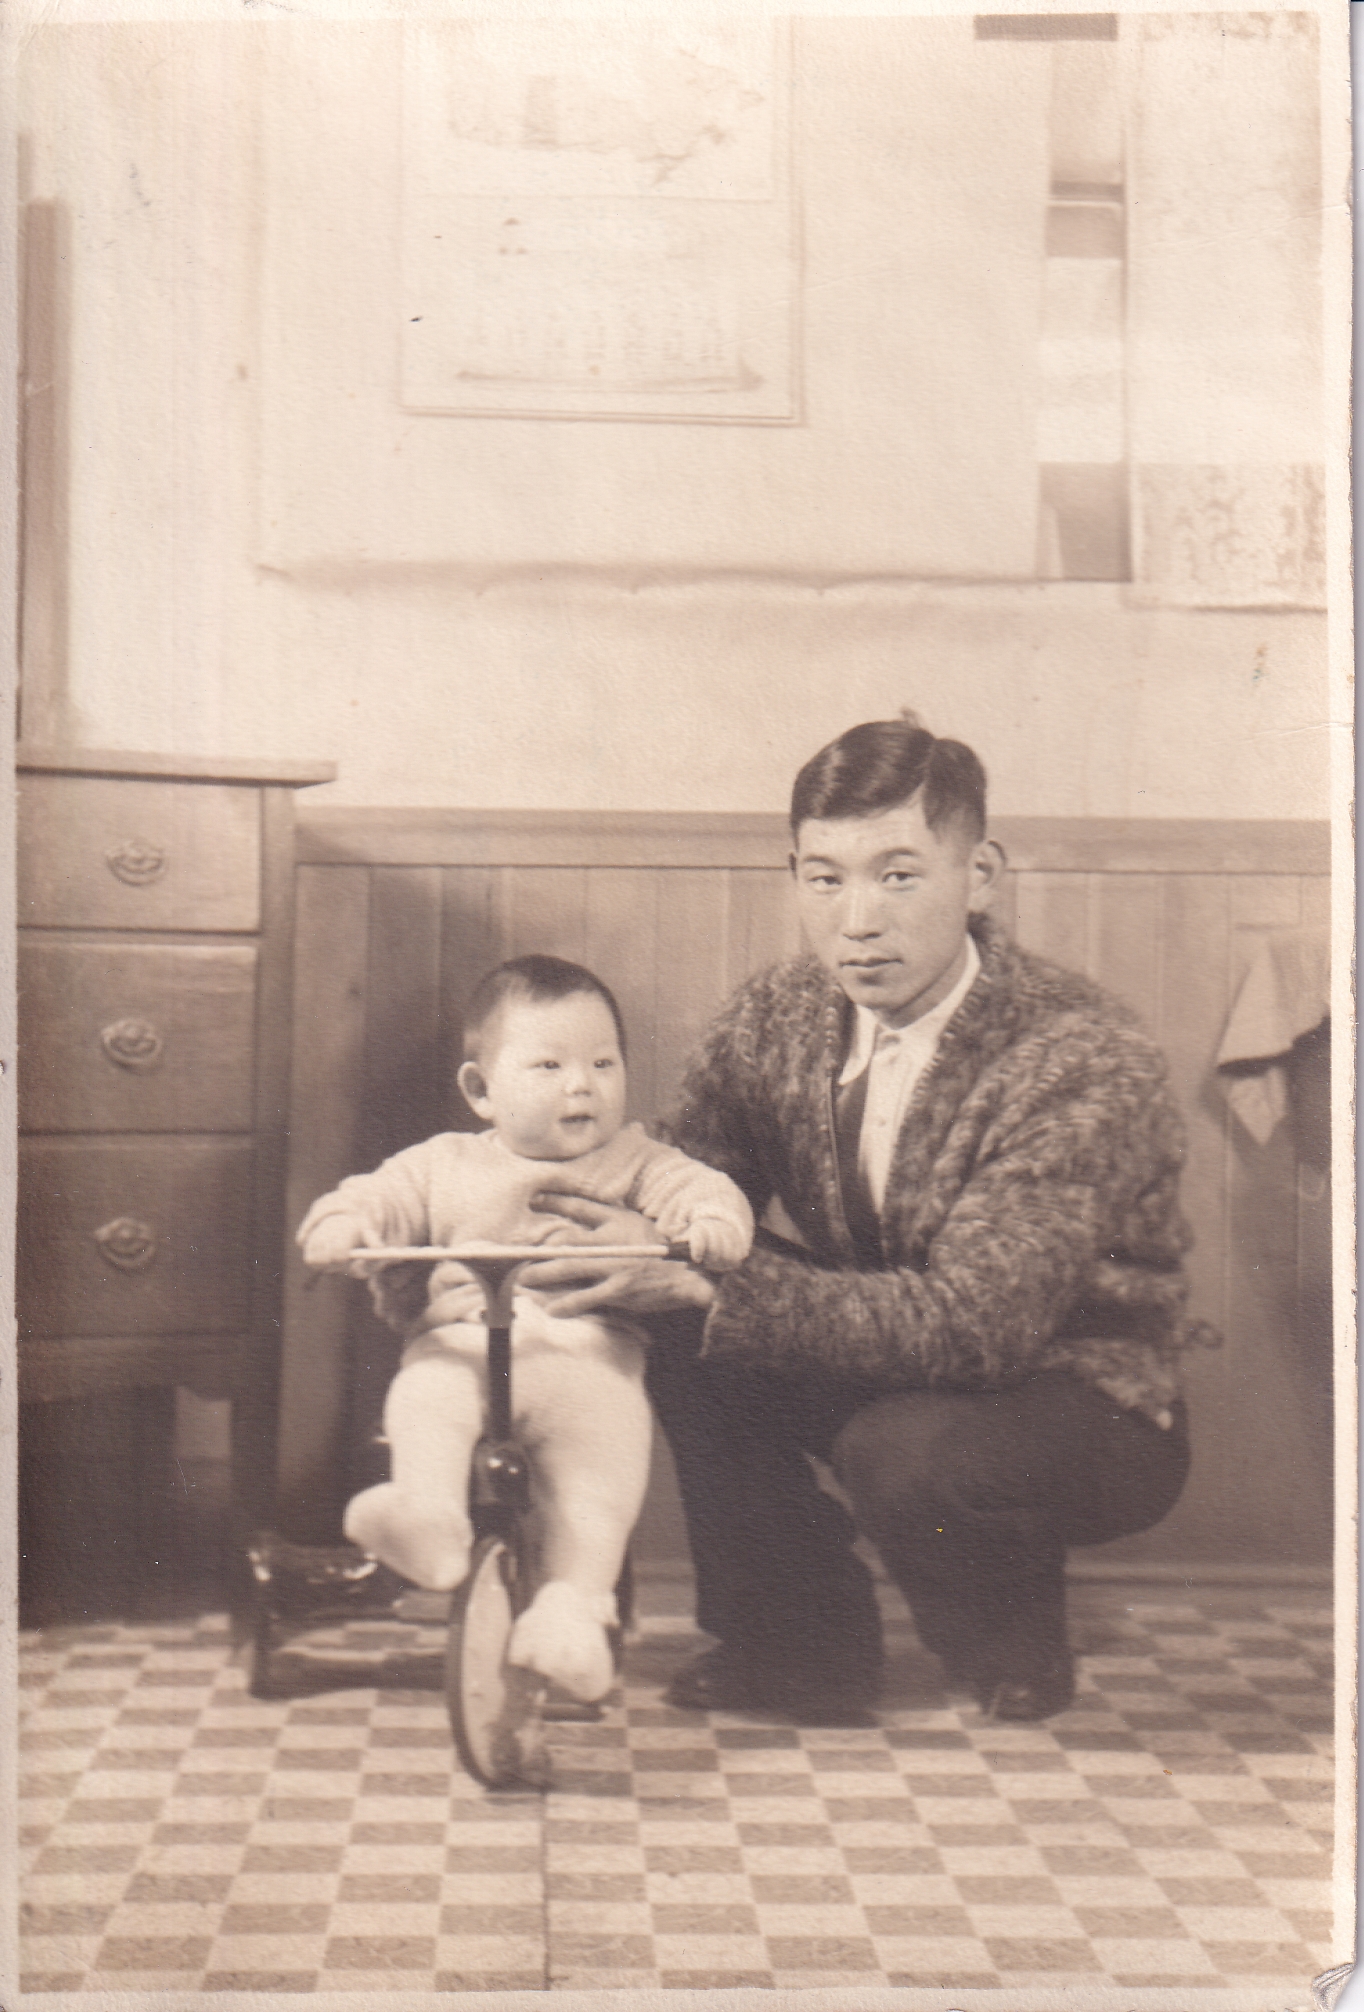 Man crouching holding an infant who is seated on a tricycle